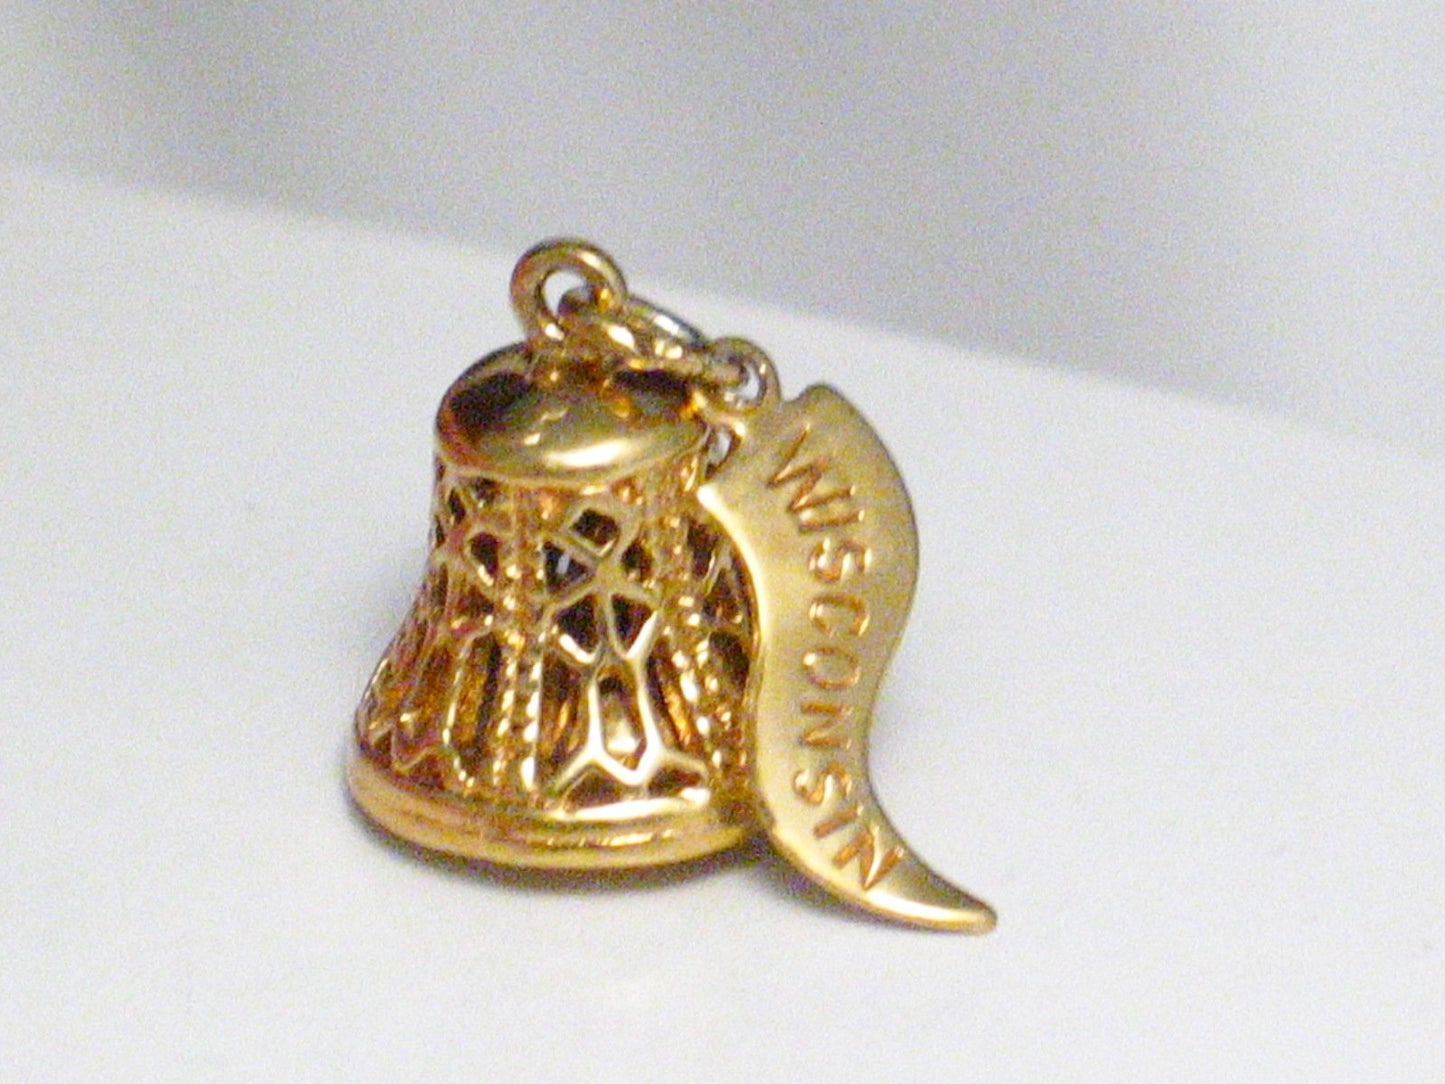 3D Charm Gold Bell w/ Wisconsin Flag Wedding Travel Sterling silver - Blingschlingers Jewelry